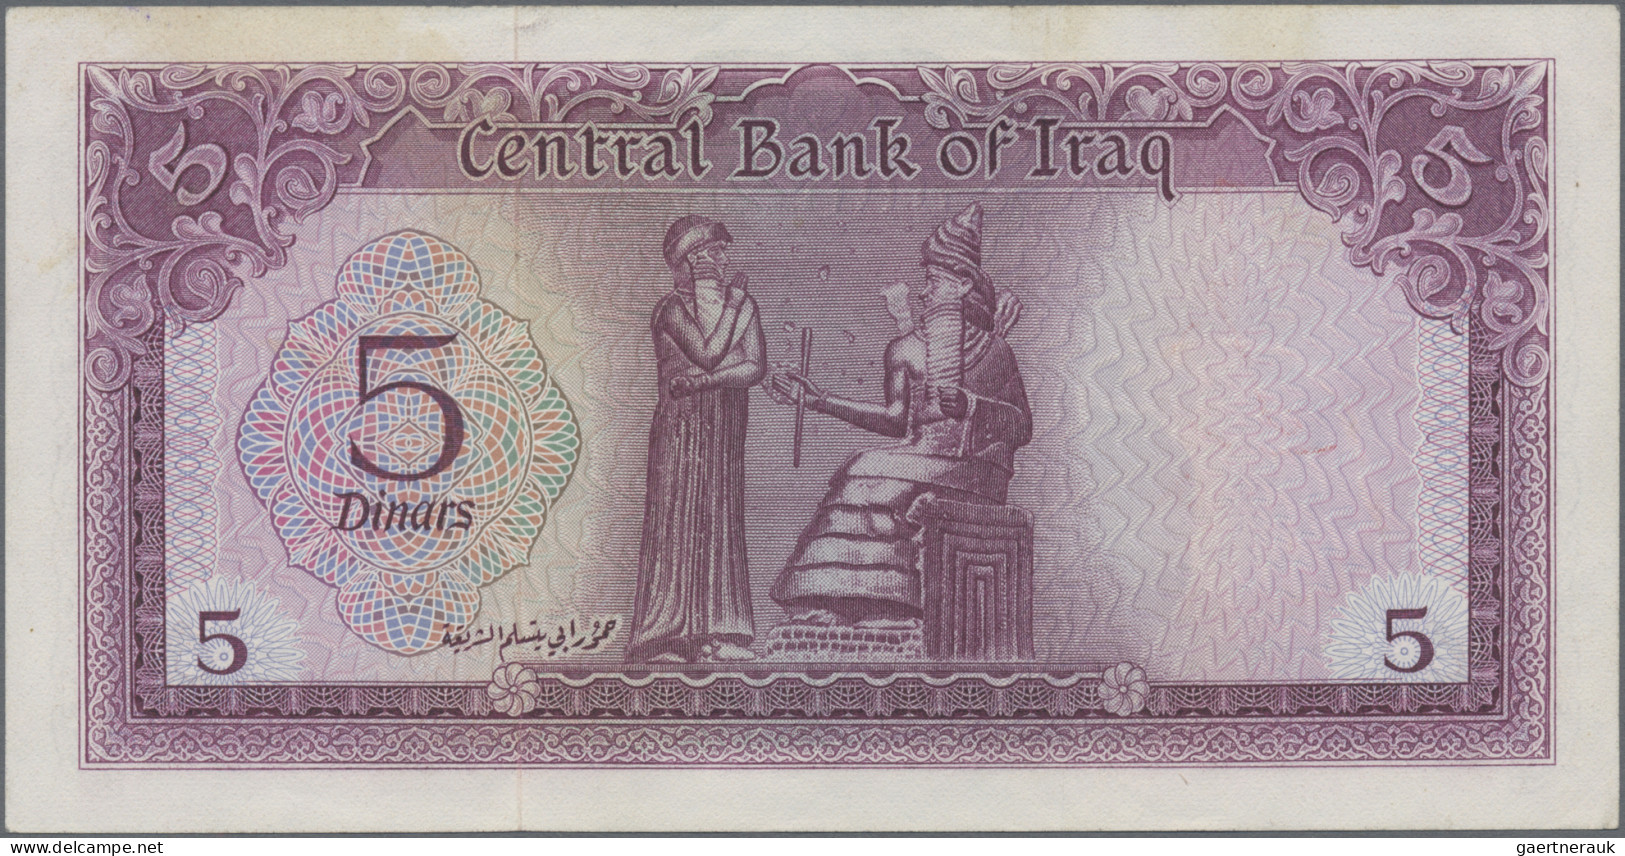 Iraq: Central Bank of Iraq, pair with 5 and 10 Dinars ND(1971), P.59 (aUNC) and